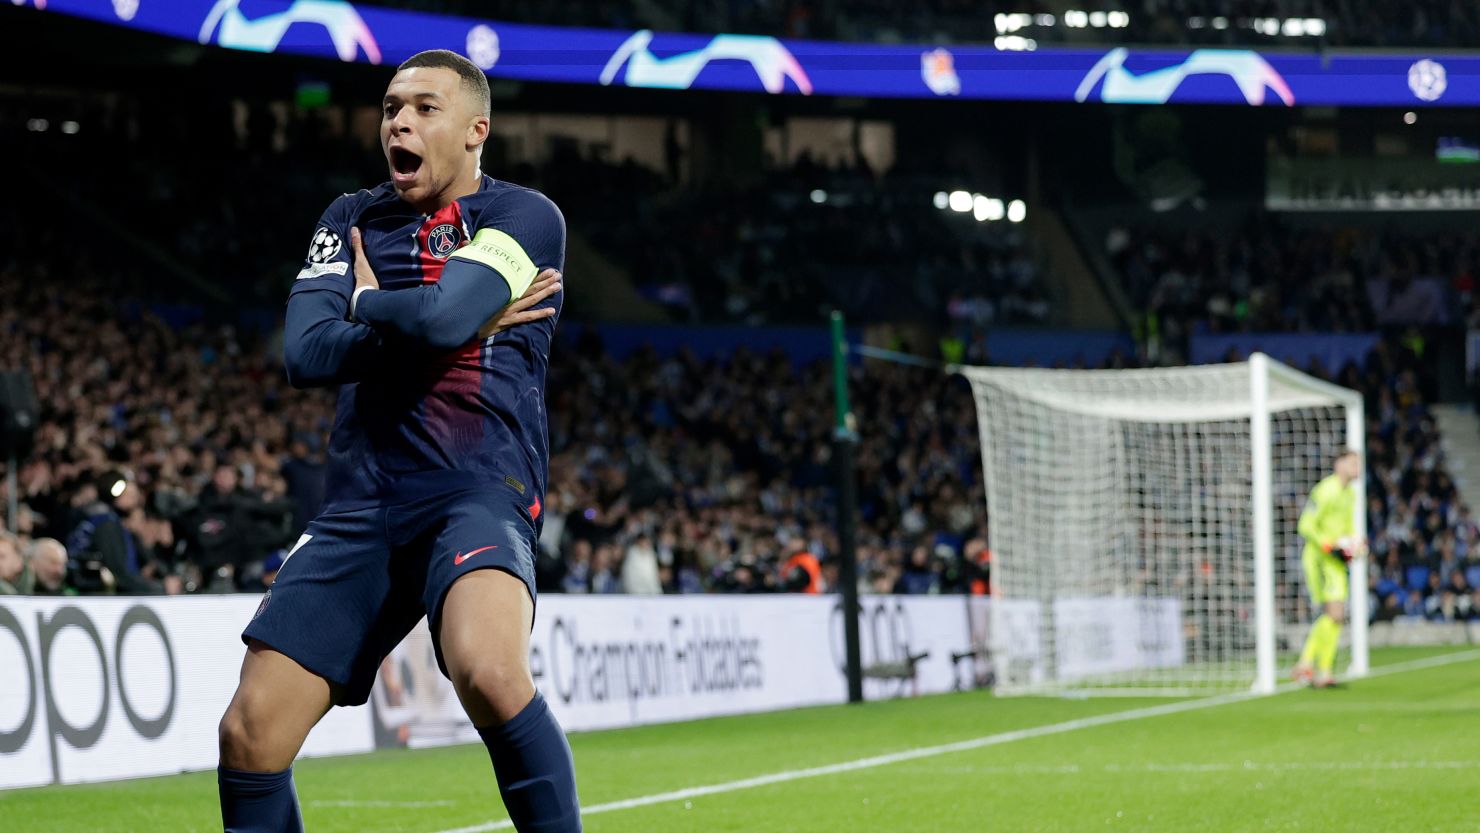 Kylian Mbappé celebrates PSG's first goal against Real Sociedad in the Champions League.